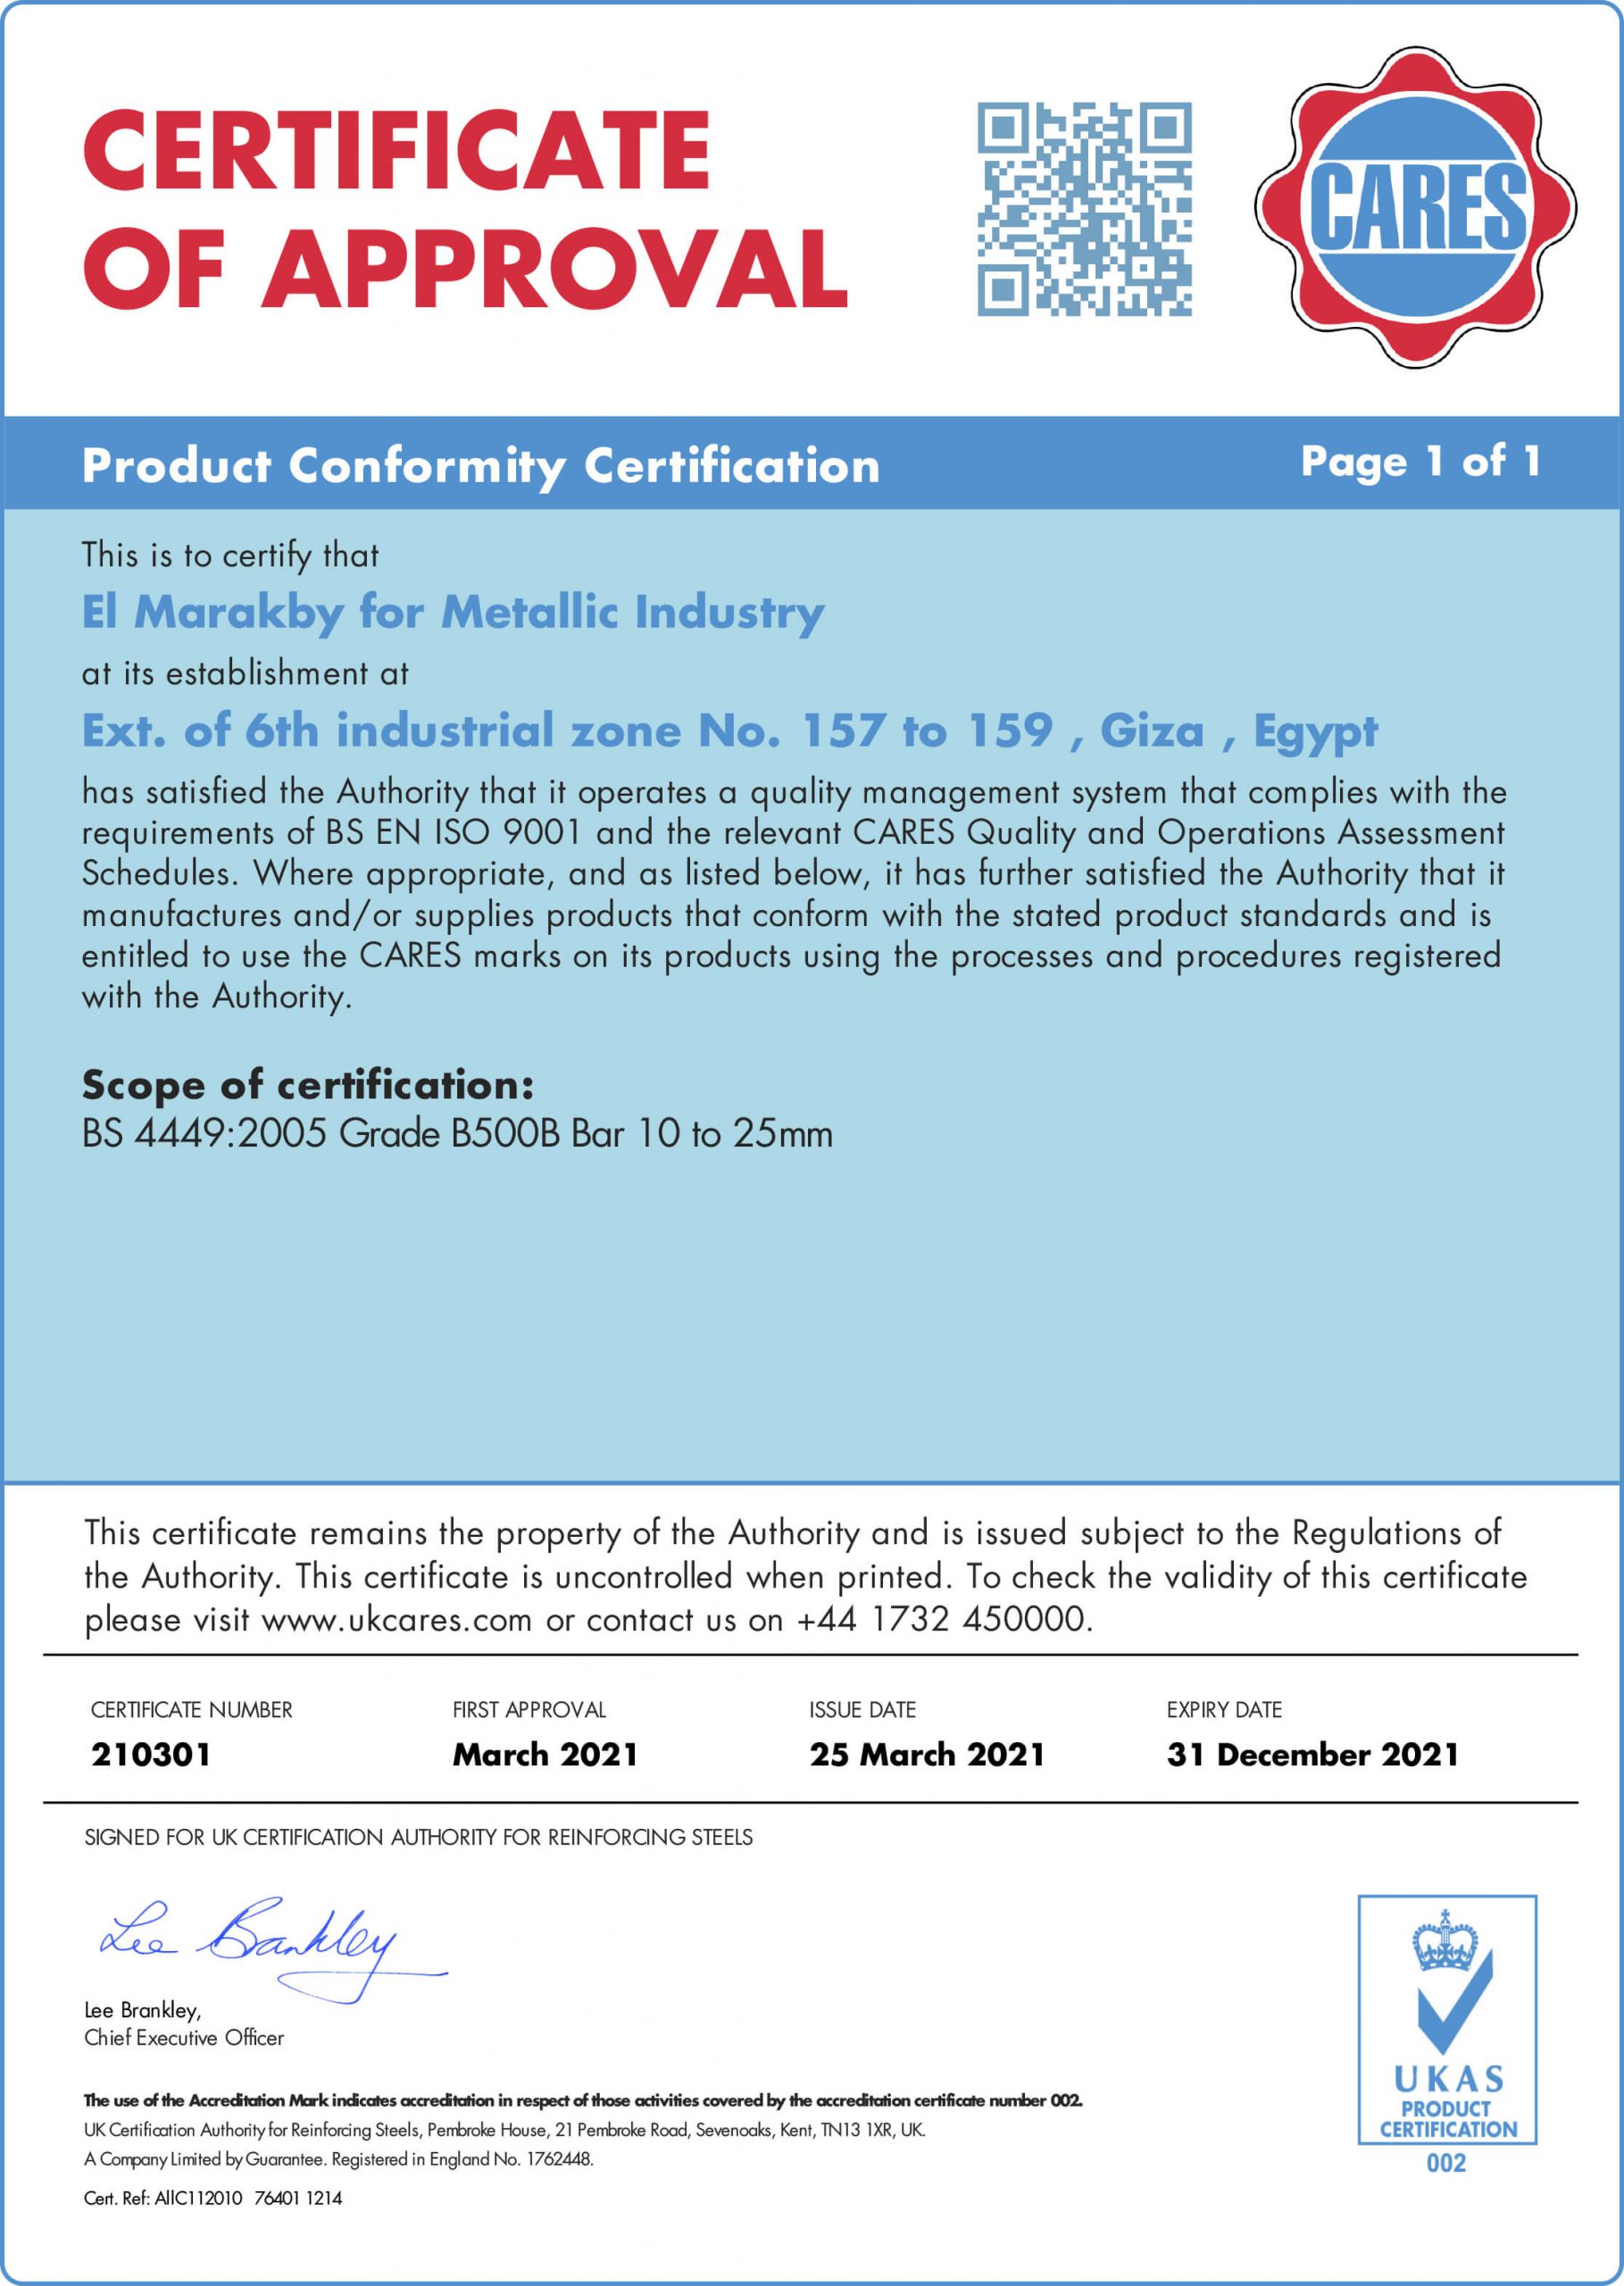 roduct Conformity Certification